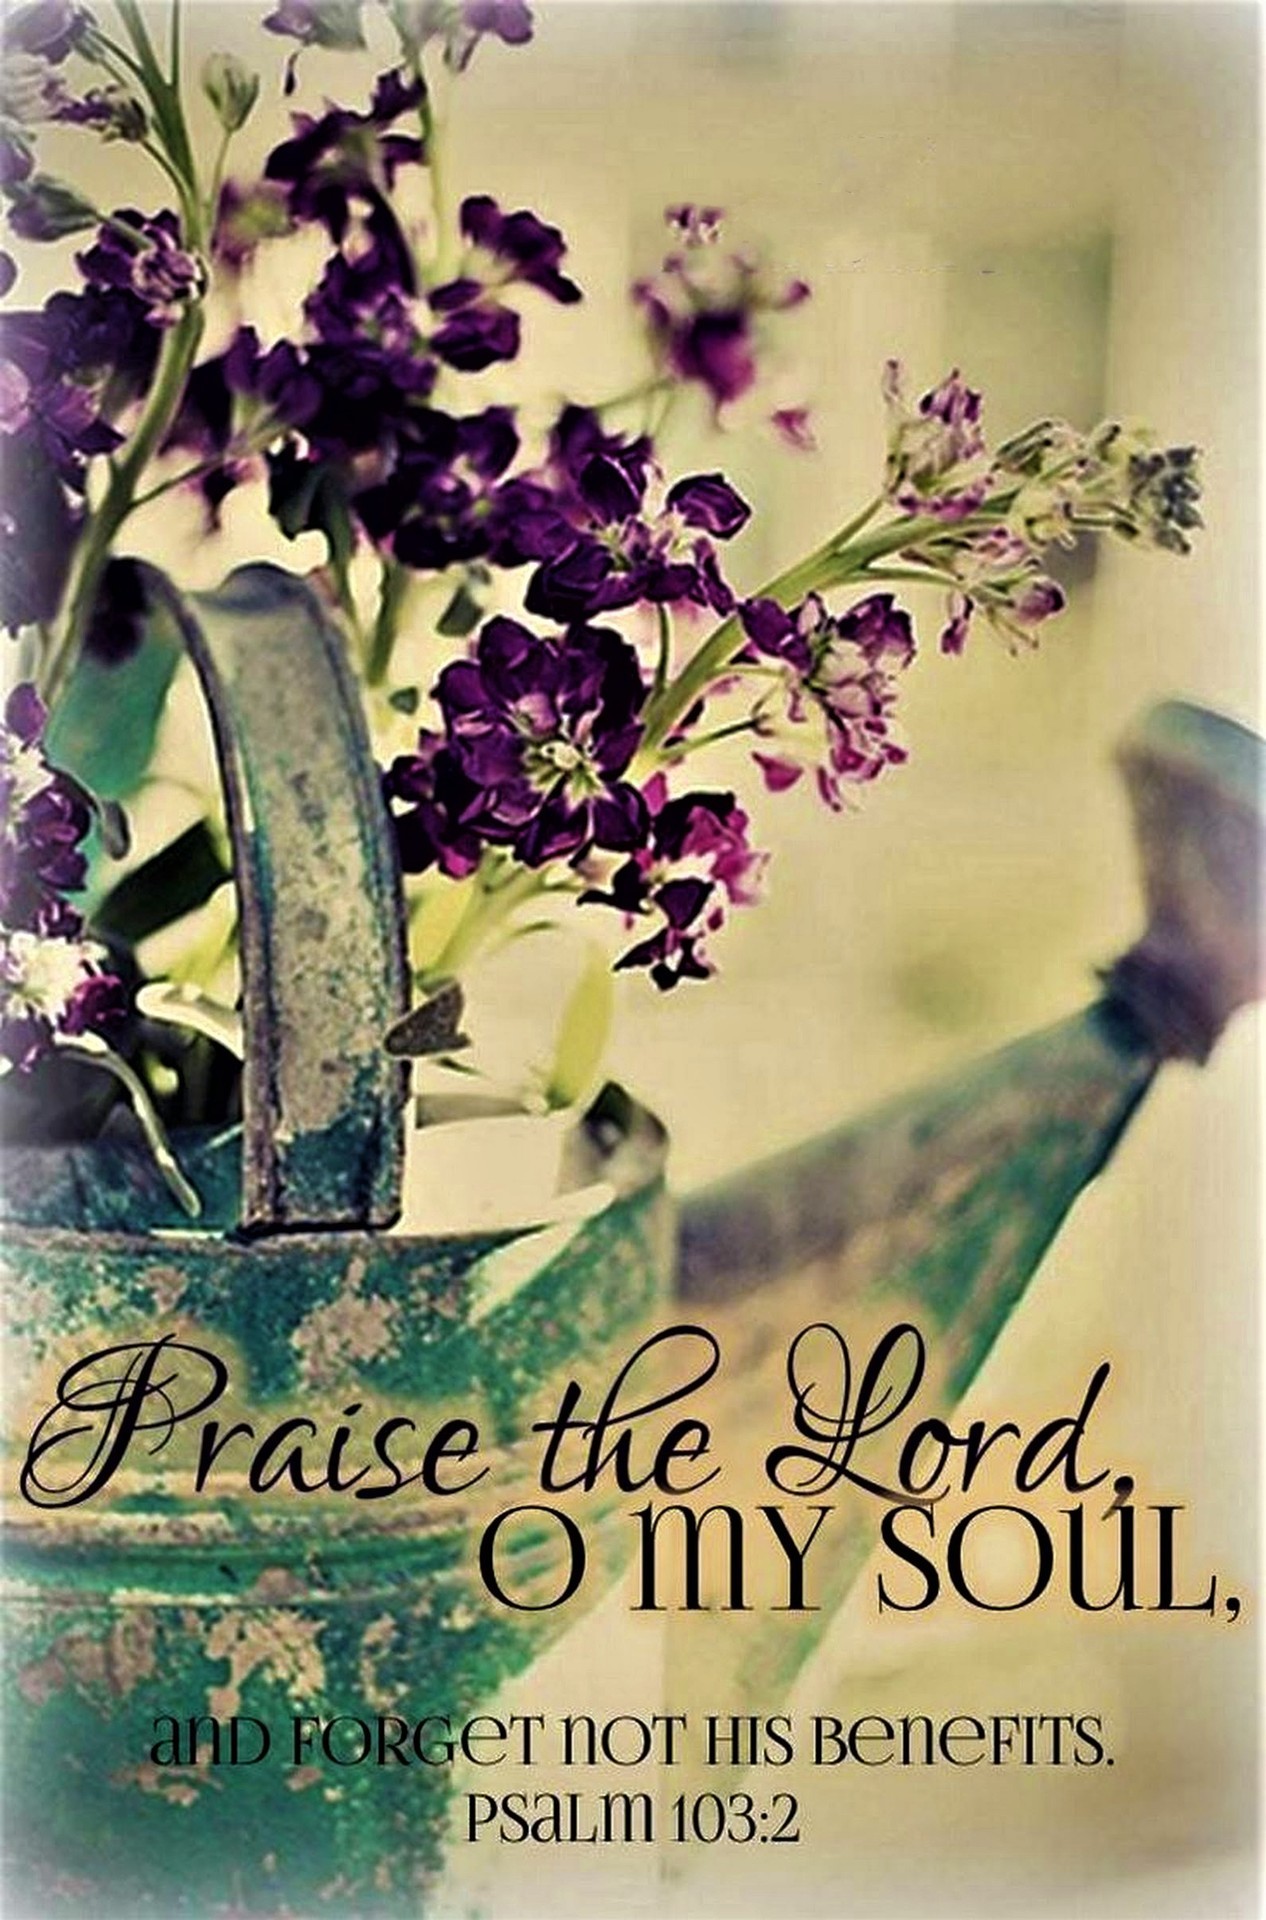 the-living-psalm-103-2-nkjv-bless-the-lord-o-my-soul